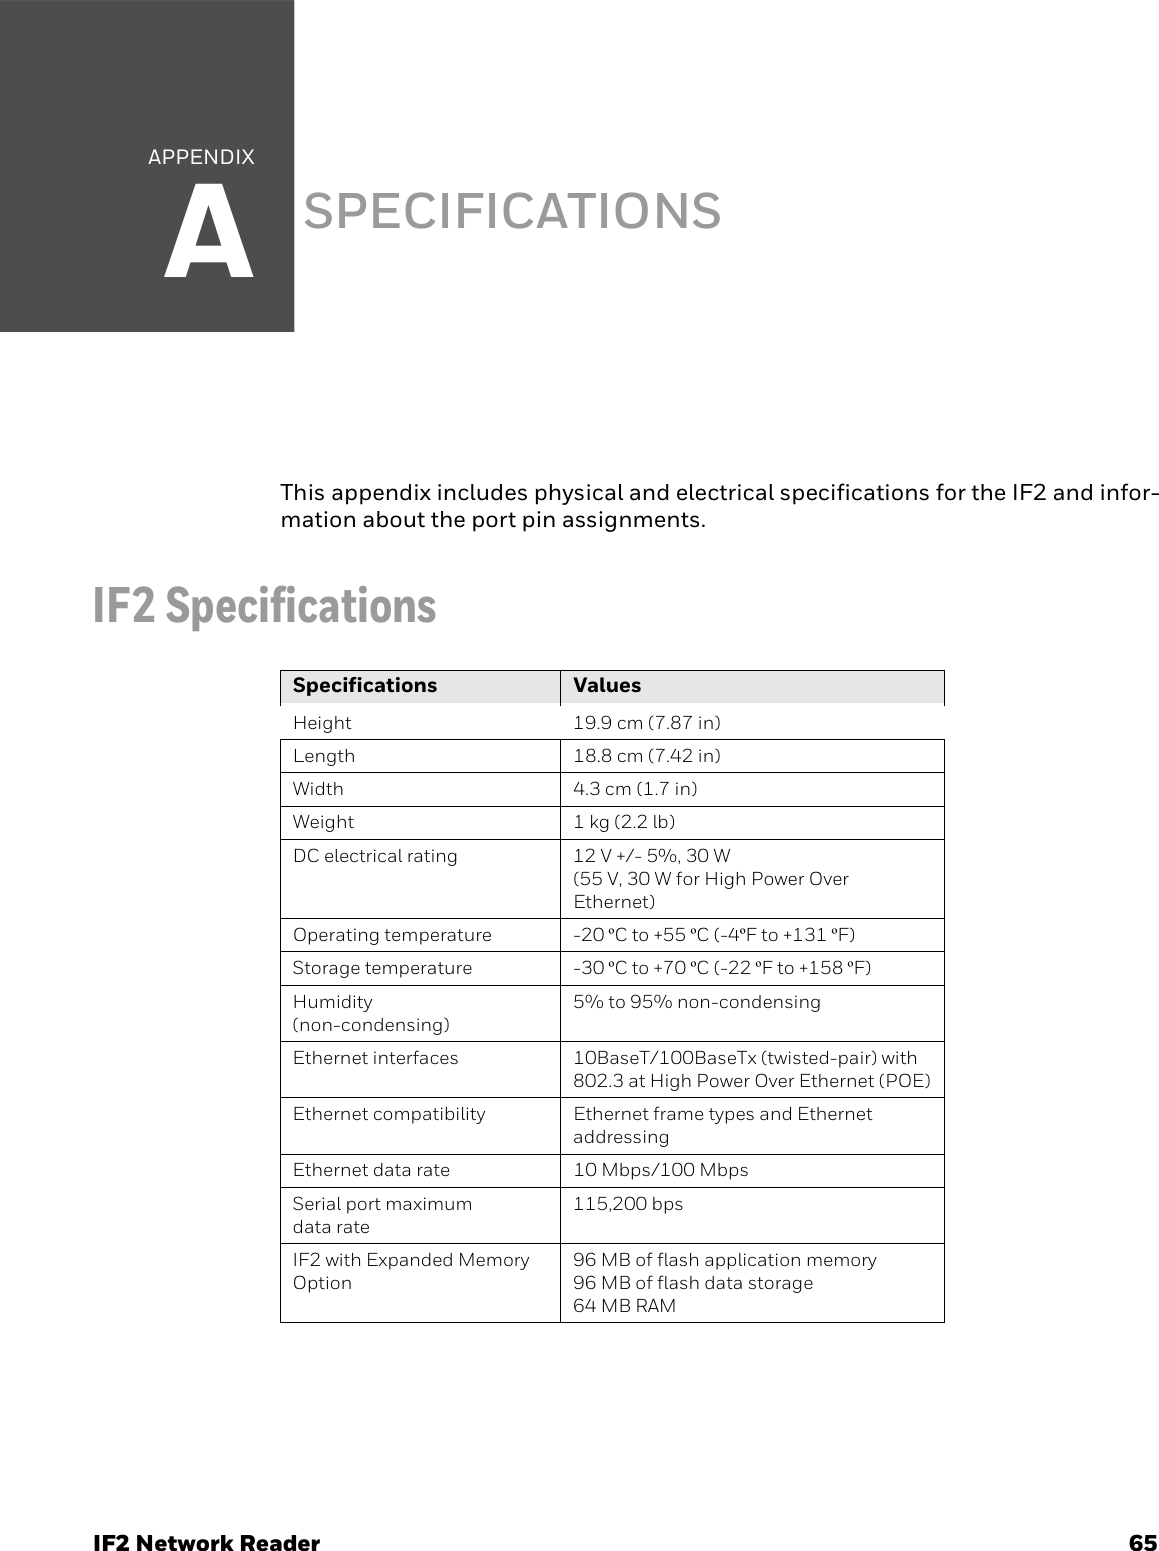 APPENDIXAIF2 Network Reader 65SPECIFICATIONSThis appendix includes physical and electrical specifications for the IF2 and infor-mation about the port pin assignments.IF2 SpecificationsSpecifications ValuesHeight 19.9 cm (7.87 in)Length 18.8 cm (7.42 in)Width 4.3 cm (1.7 in)Weight 1 kg (2.2 lb)DC electrical rating 12 V +/- 5%, 30 W (55 V, 30 W for High Power Over Ethernet)Operating temperature -20 ºC to +55 ºC (-4ºF to +131 ºF)Storage temperature -30 ºC to +70 ºC (-22 ºF to +158 ºF)Humidity (non-condensing)5% to 95% non-condensingEthernet interfaces 10BaseT/100BaseTx (twisted-pair) with 802.3 at High Power Over Ethernet (POE)Ethernet compatibility Ethernet frame types and Ethernet addressingEthernet data rate 10 Mbps/100 MbpsSerial port maximum data rate115,200 bpsIF2 with Expanded Memory Option96 MB of flash application memory96 MB of flash data storage64 MB RAM